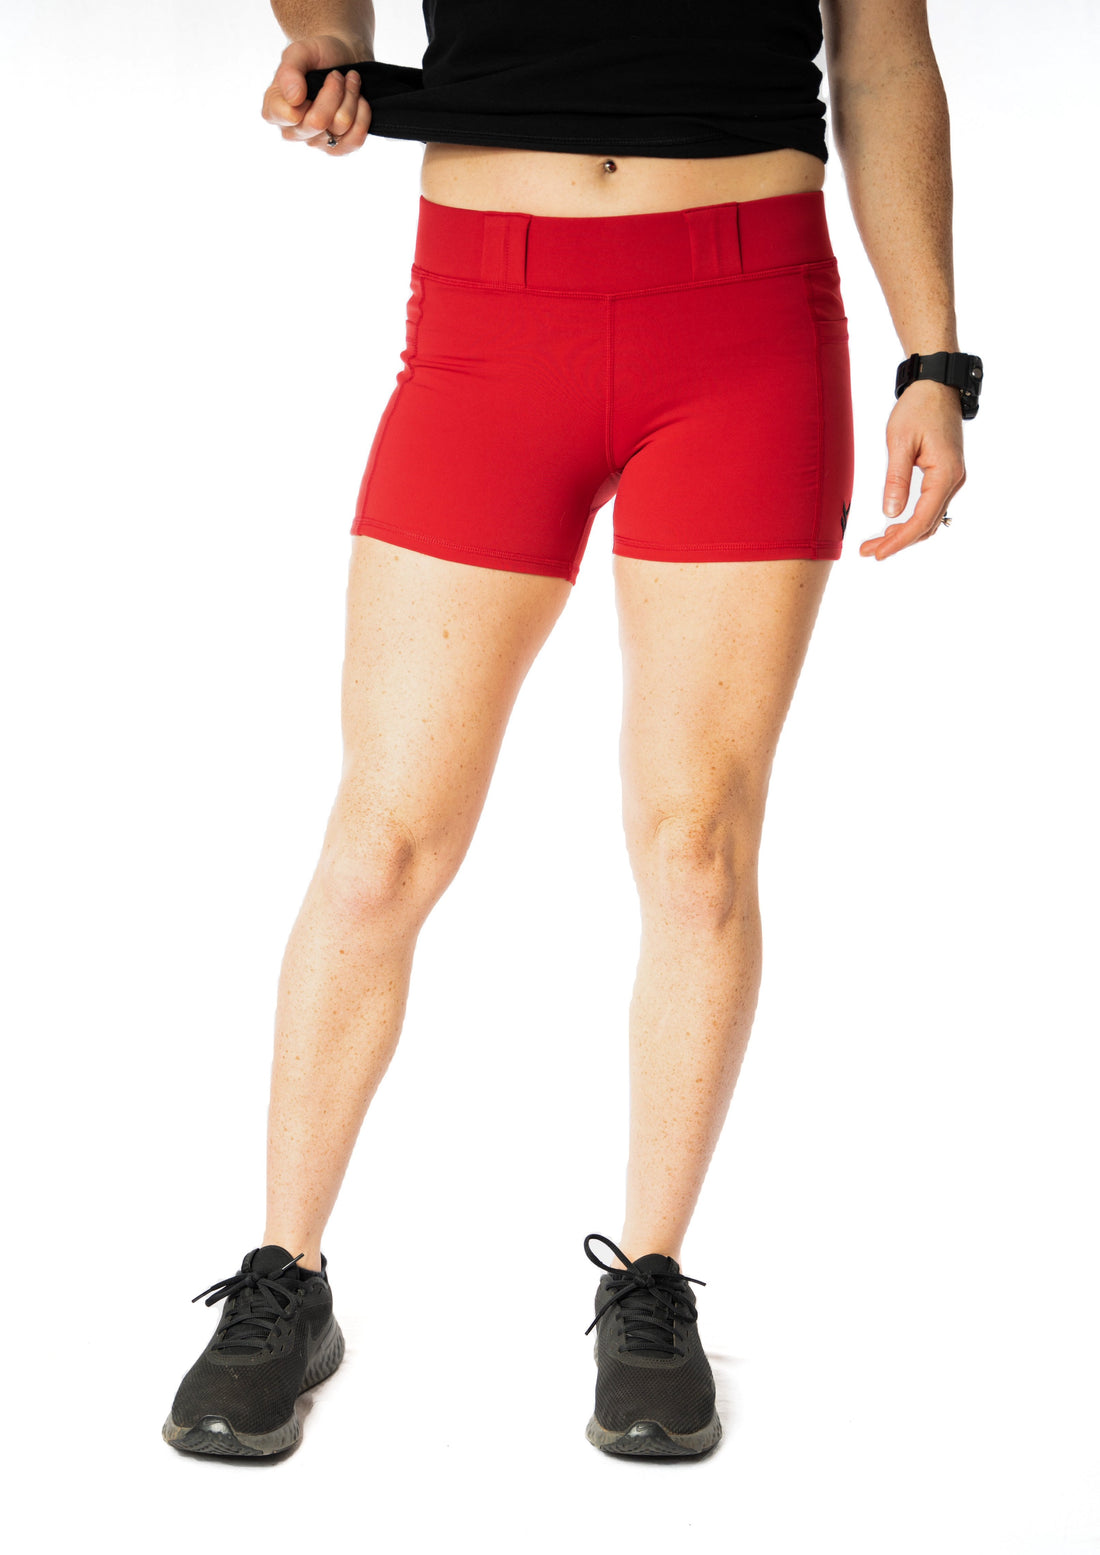 womens chili red conceal carry compression shorts